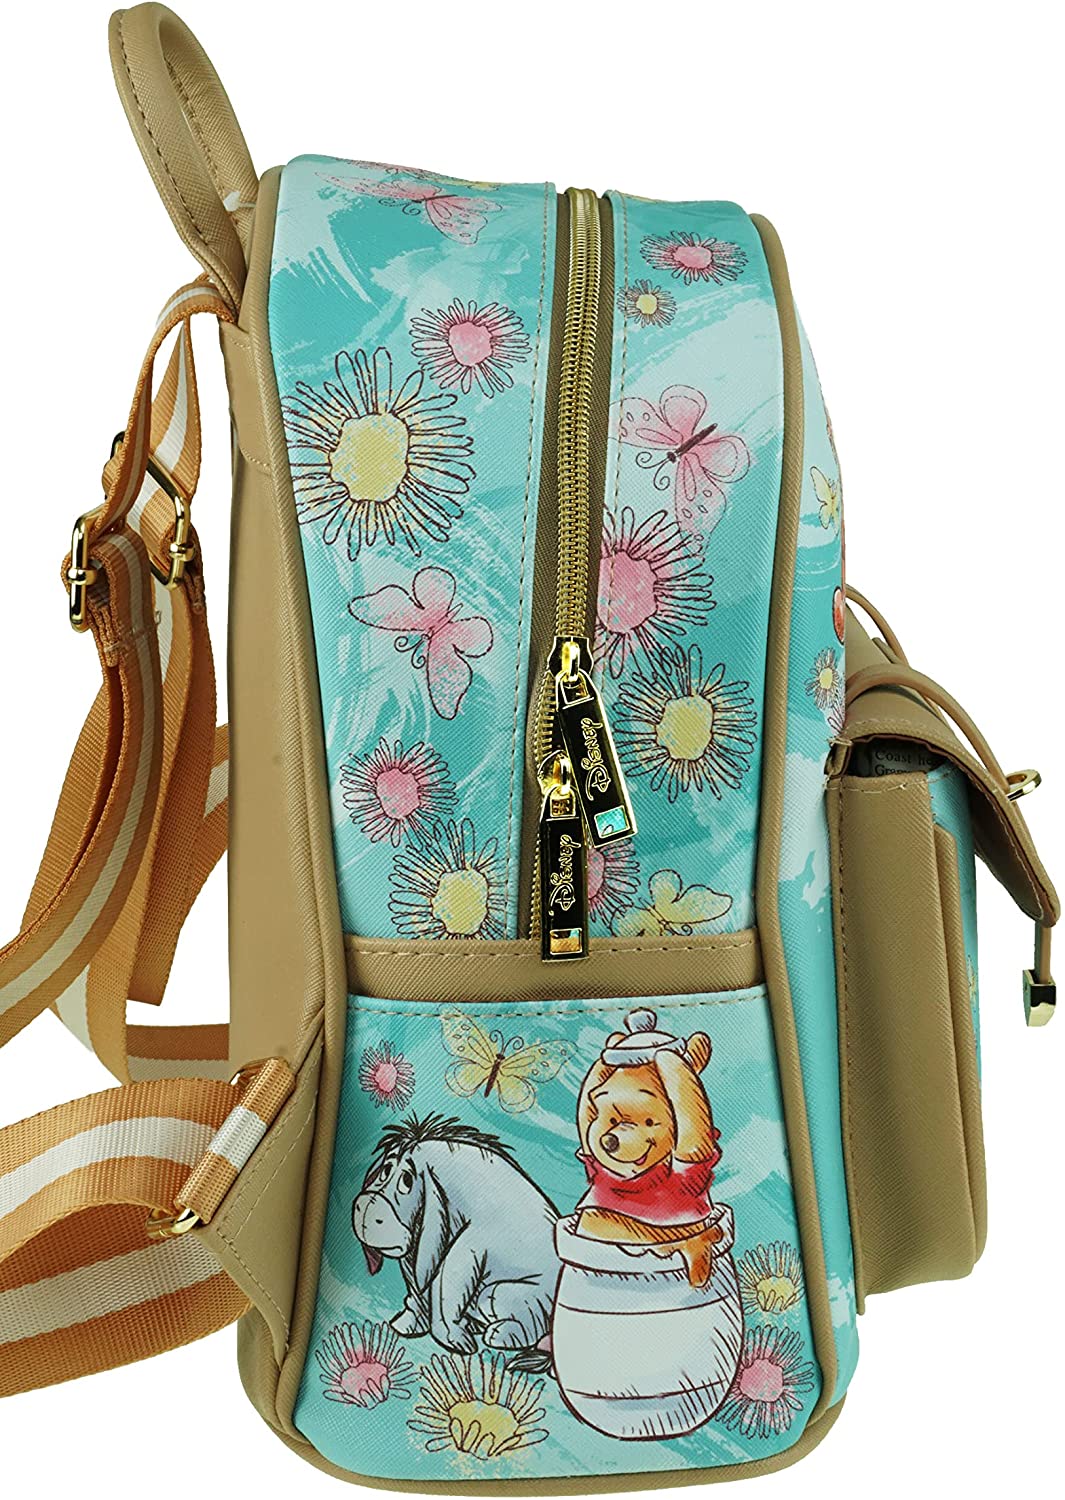 Winnie The Pooh - Tigger 11" Faux Leather Mini Backpack - A21774 - GTE Zone